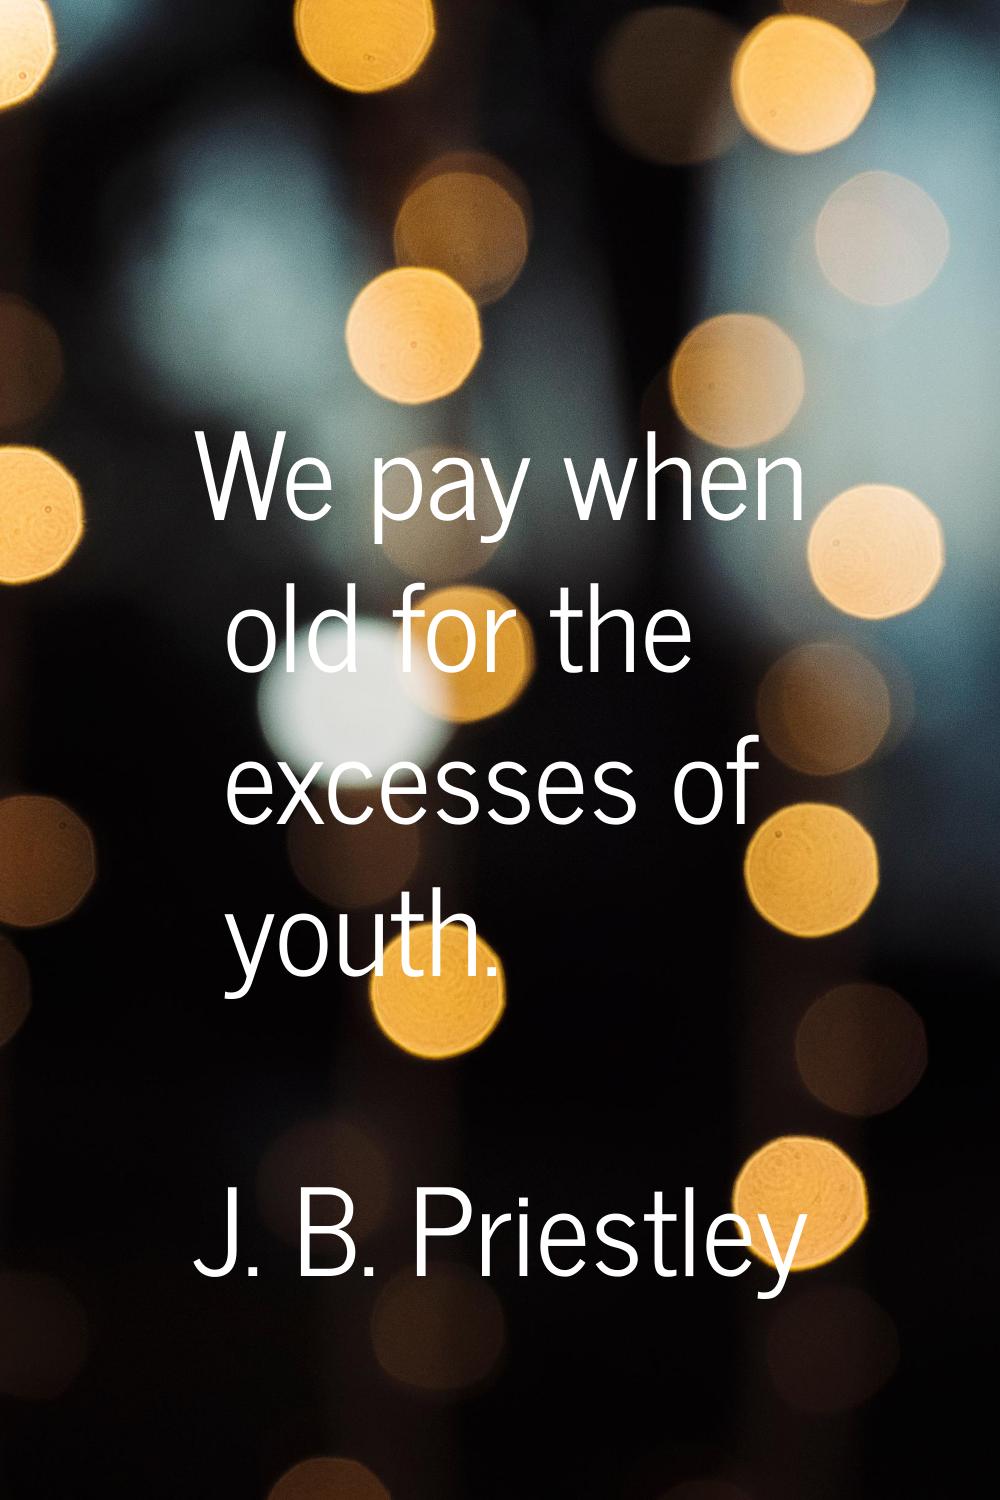 We pay when old for the excesses of youth.